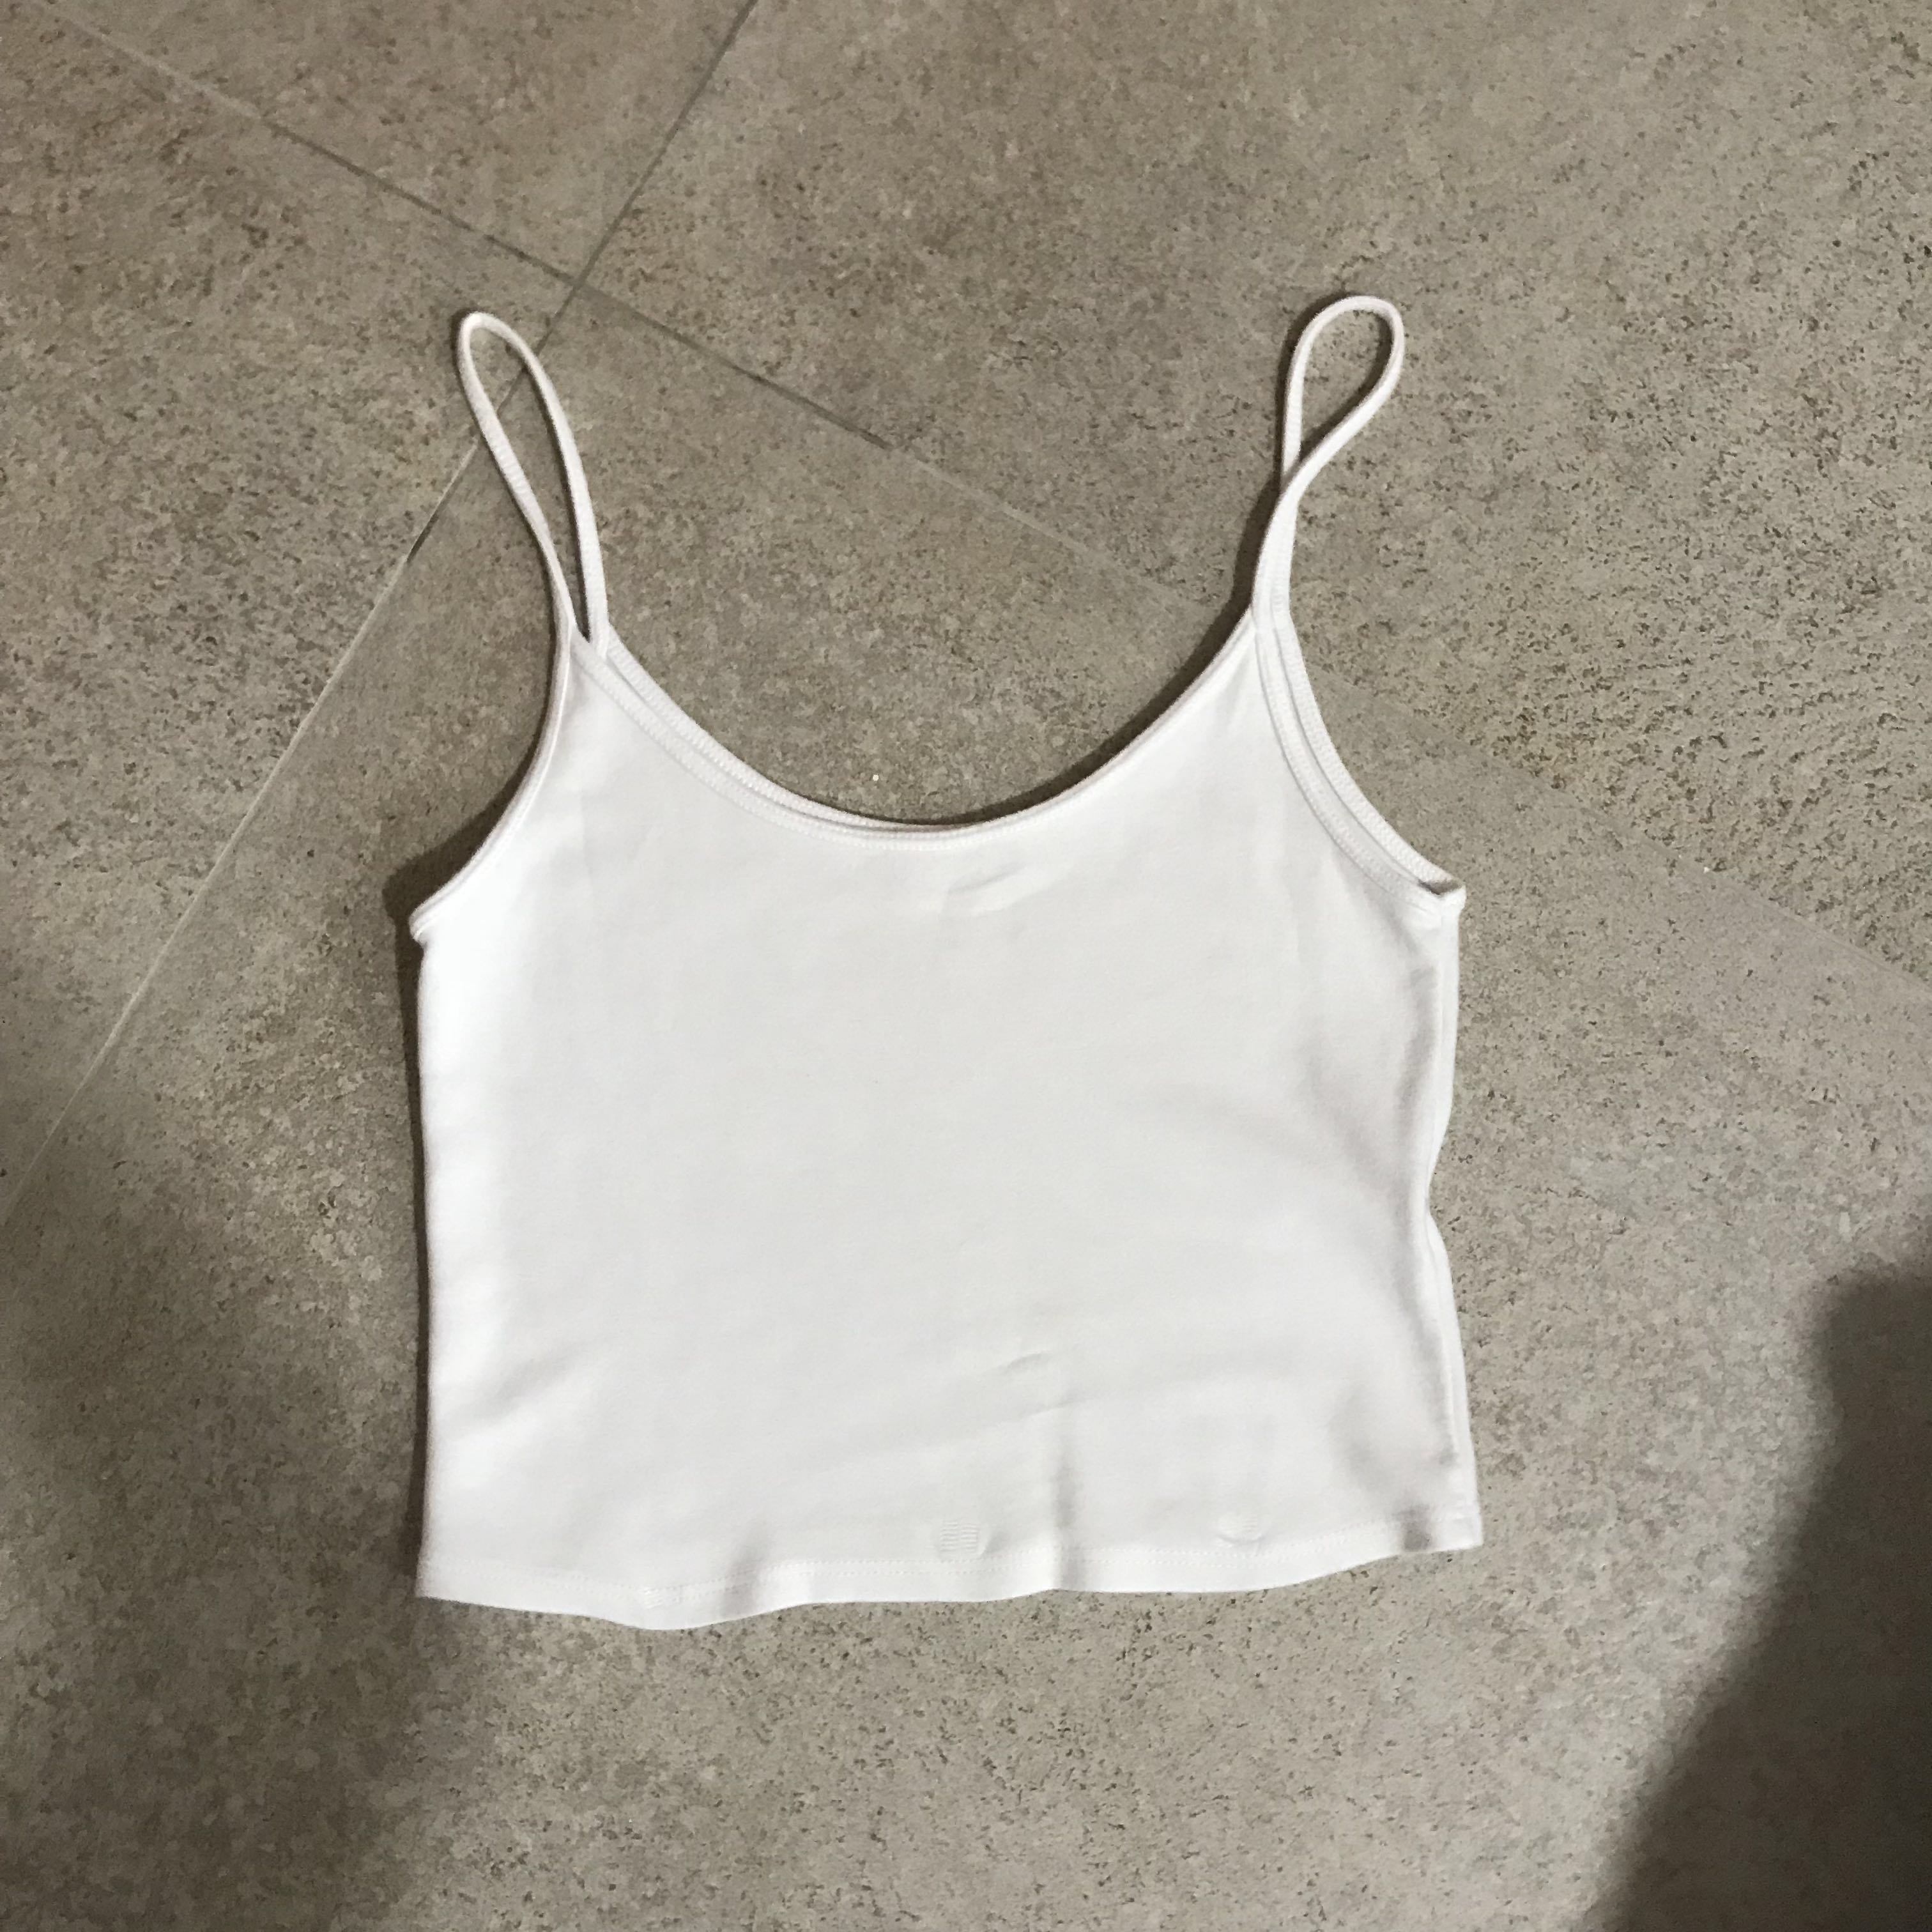 Brandy Melville White Tank Top Women S Fashion Tops Other Tops On Carousell